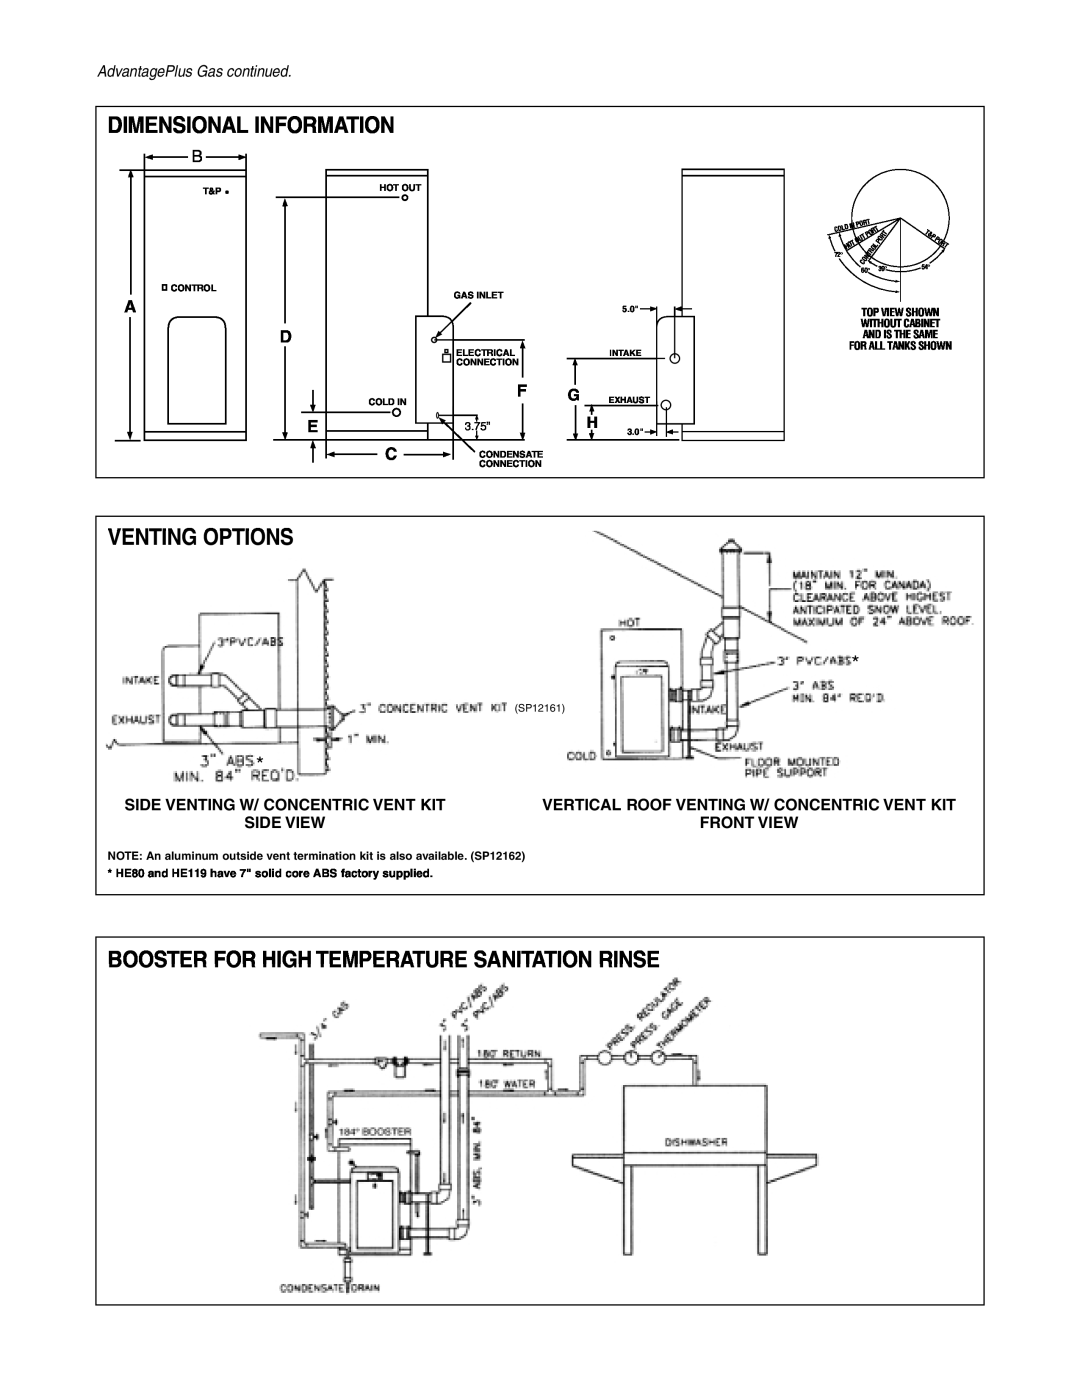 Rheem HE45-199 manual Dimensional Information, Venting Options, Booster For High Temperature Sanitation Rinse, Side View 